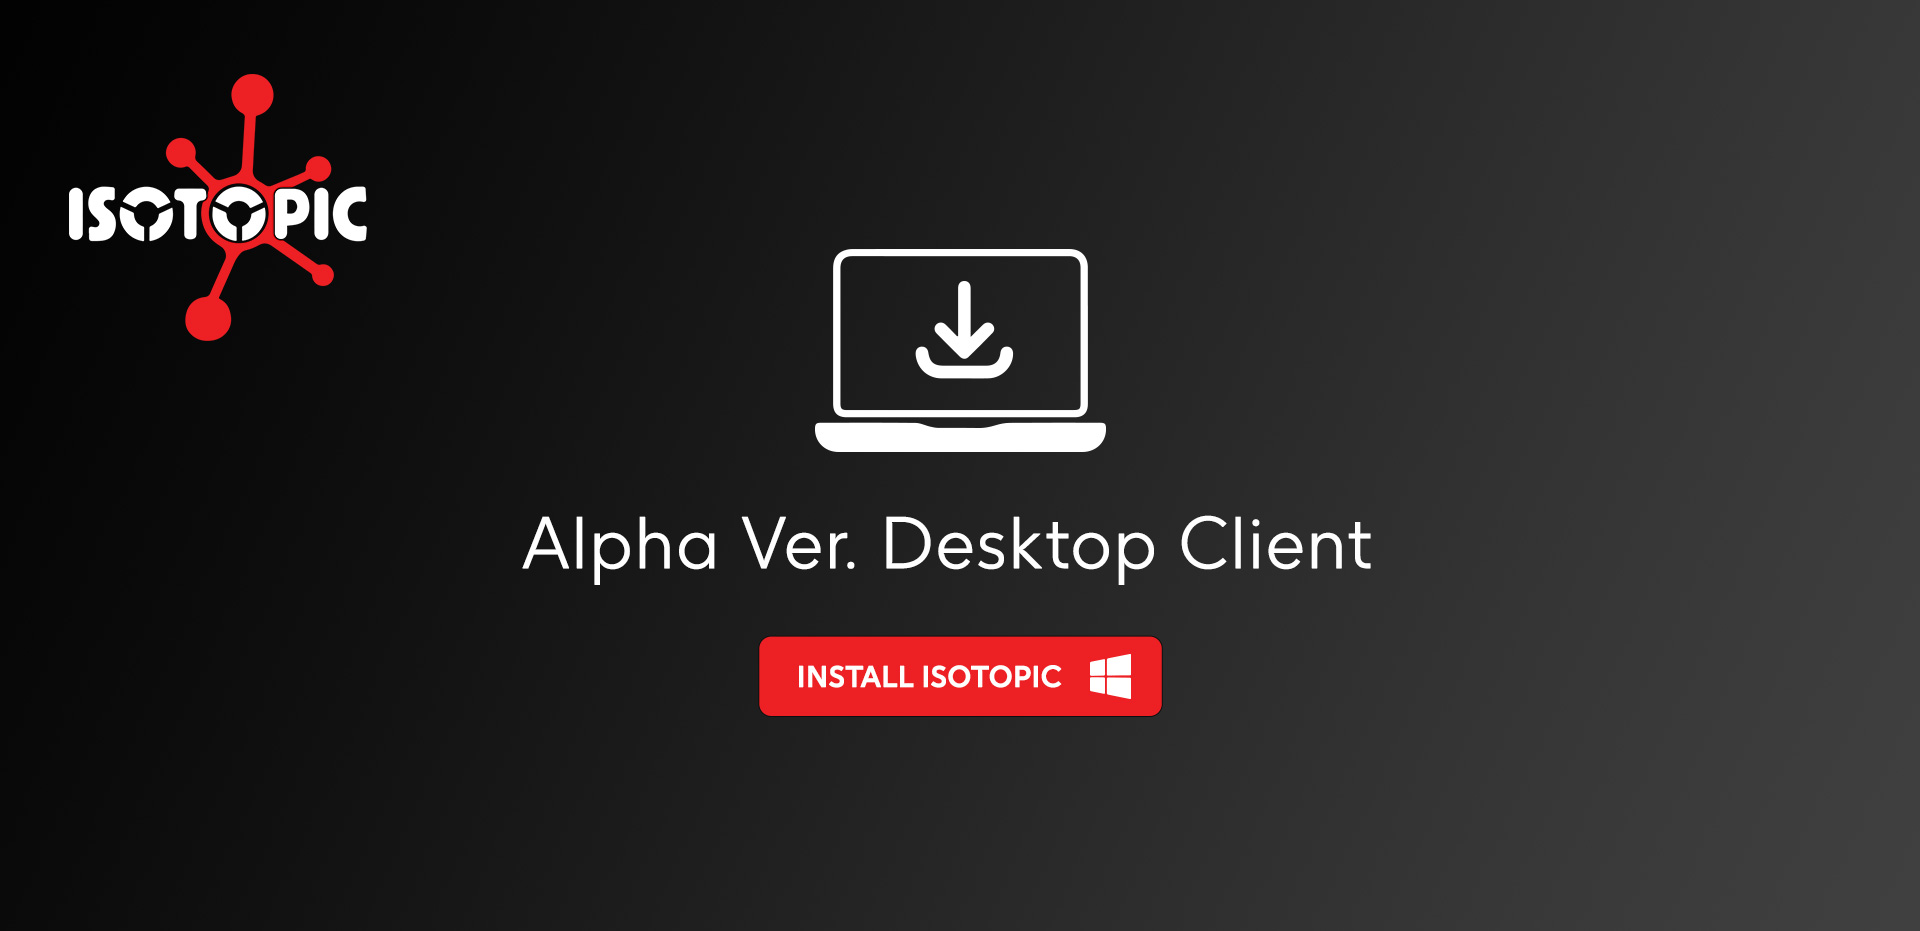 Download Isotopic Client for Windows Desktop